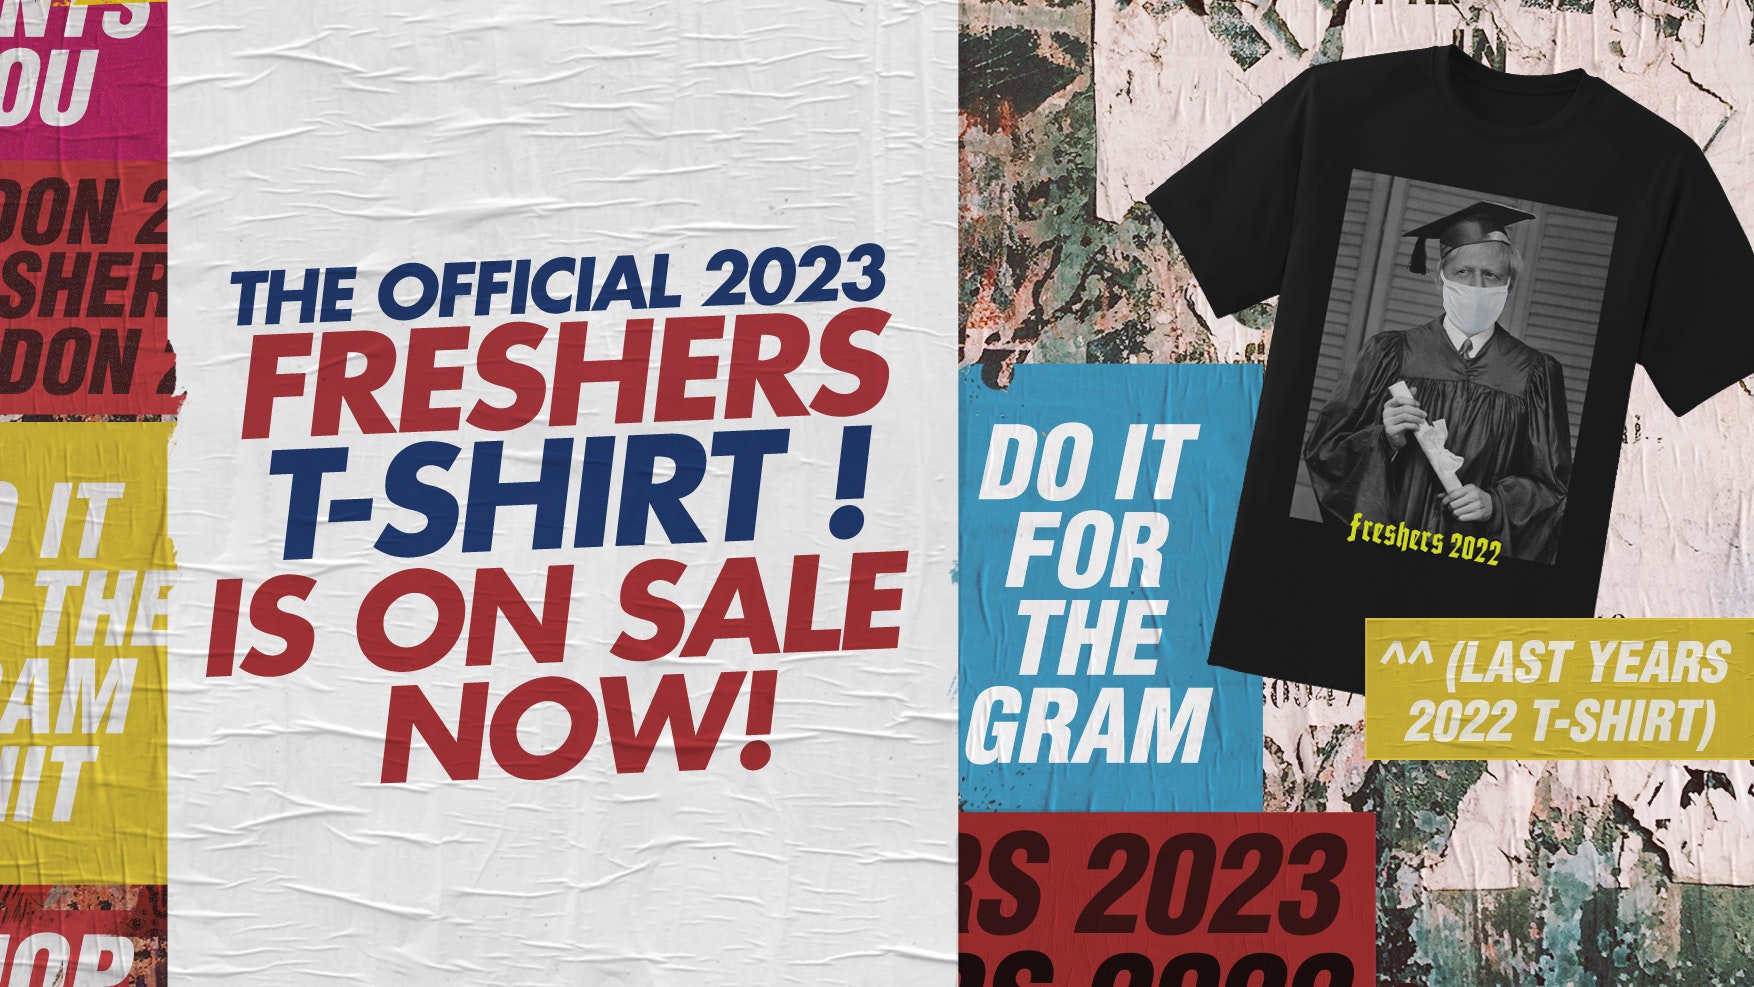 The London Freshers T-Shirt 2023 – Purchase Yours Now!